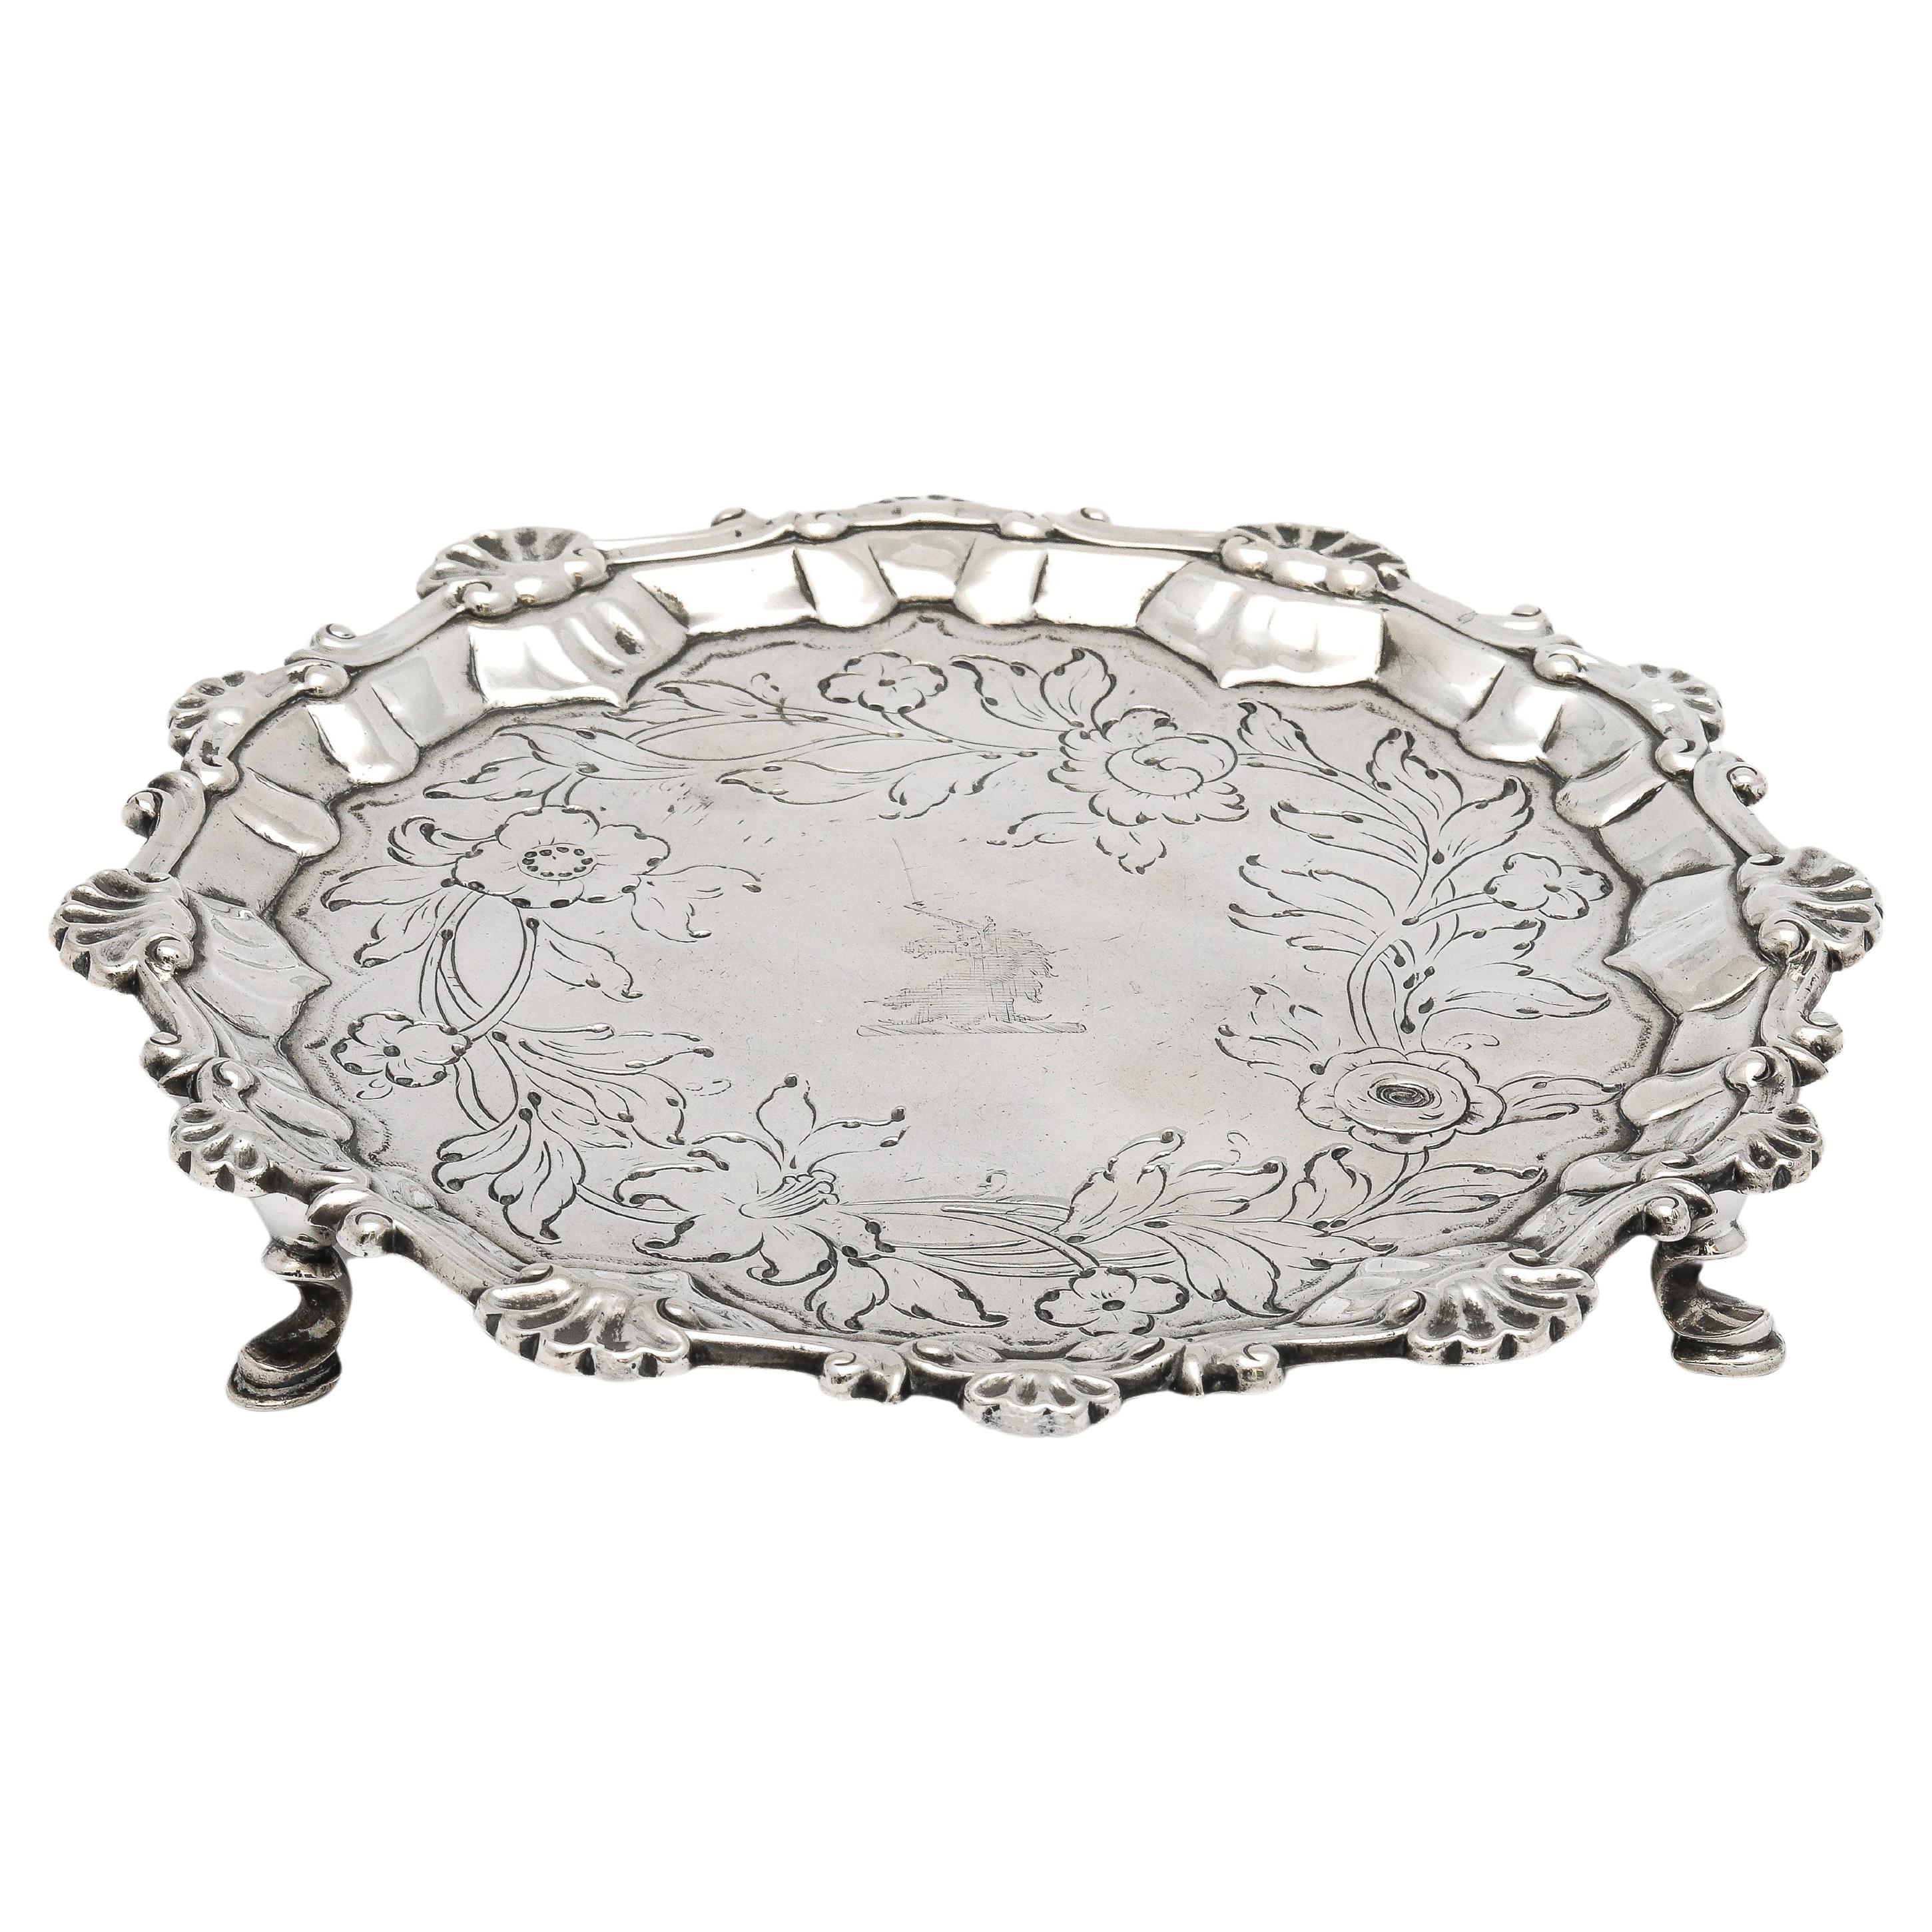 George III Period (1764) Footed Sterling Silver Salver/Tray